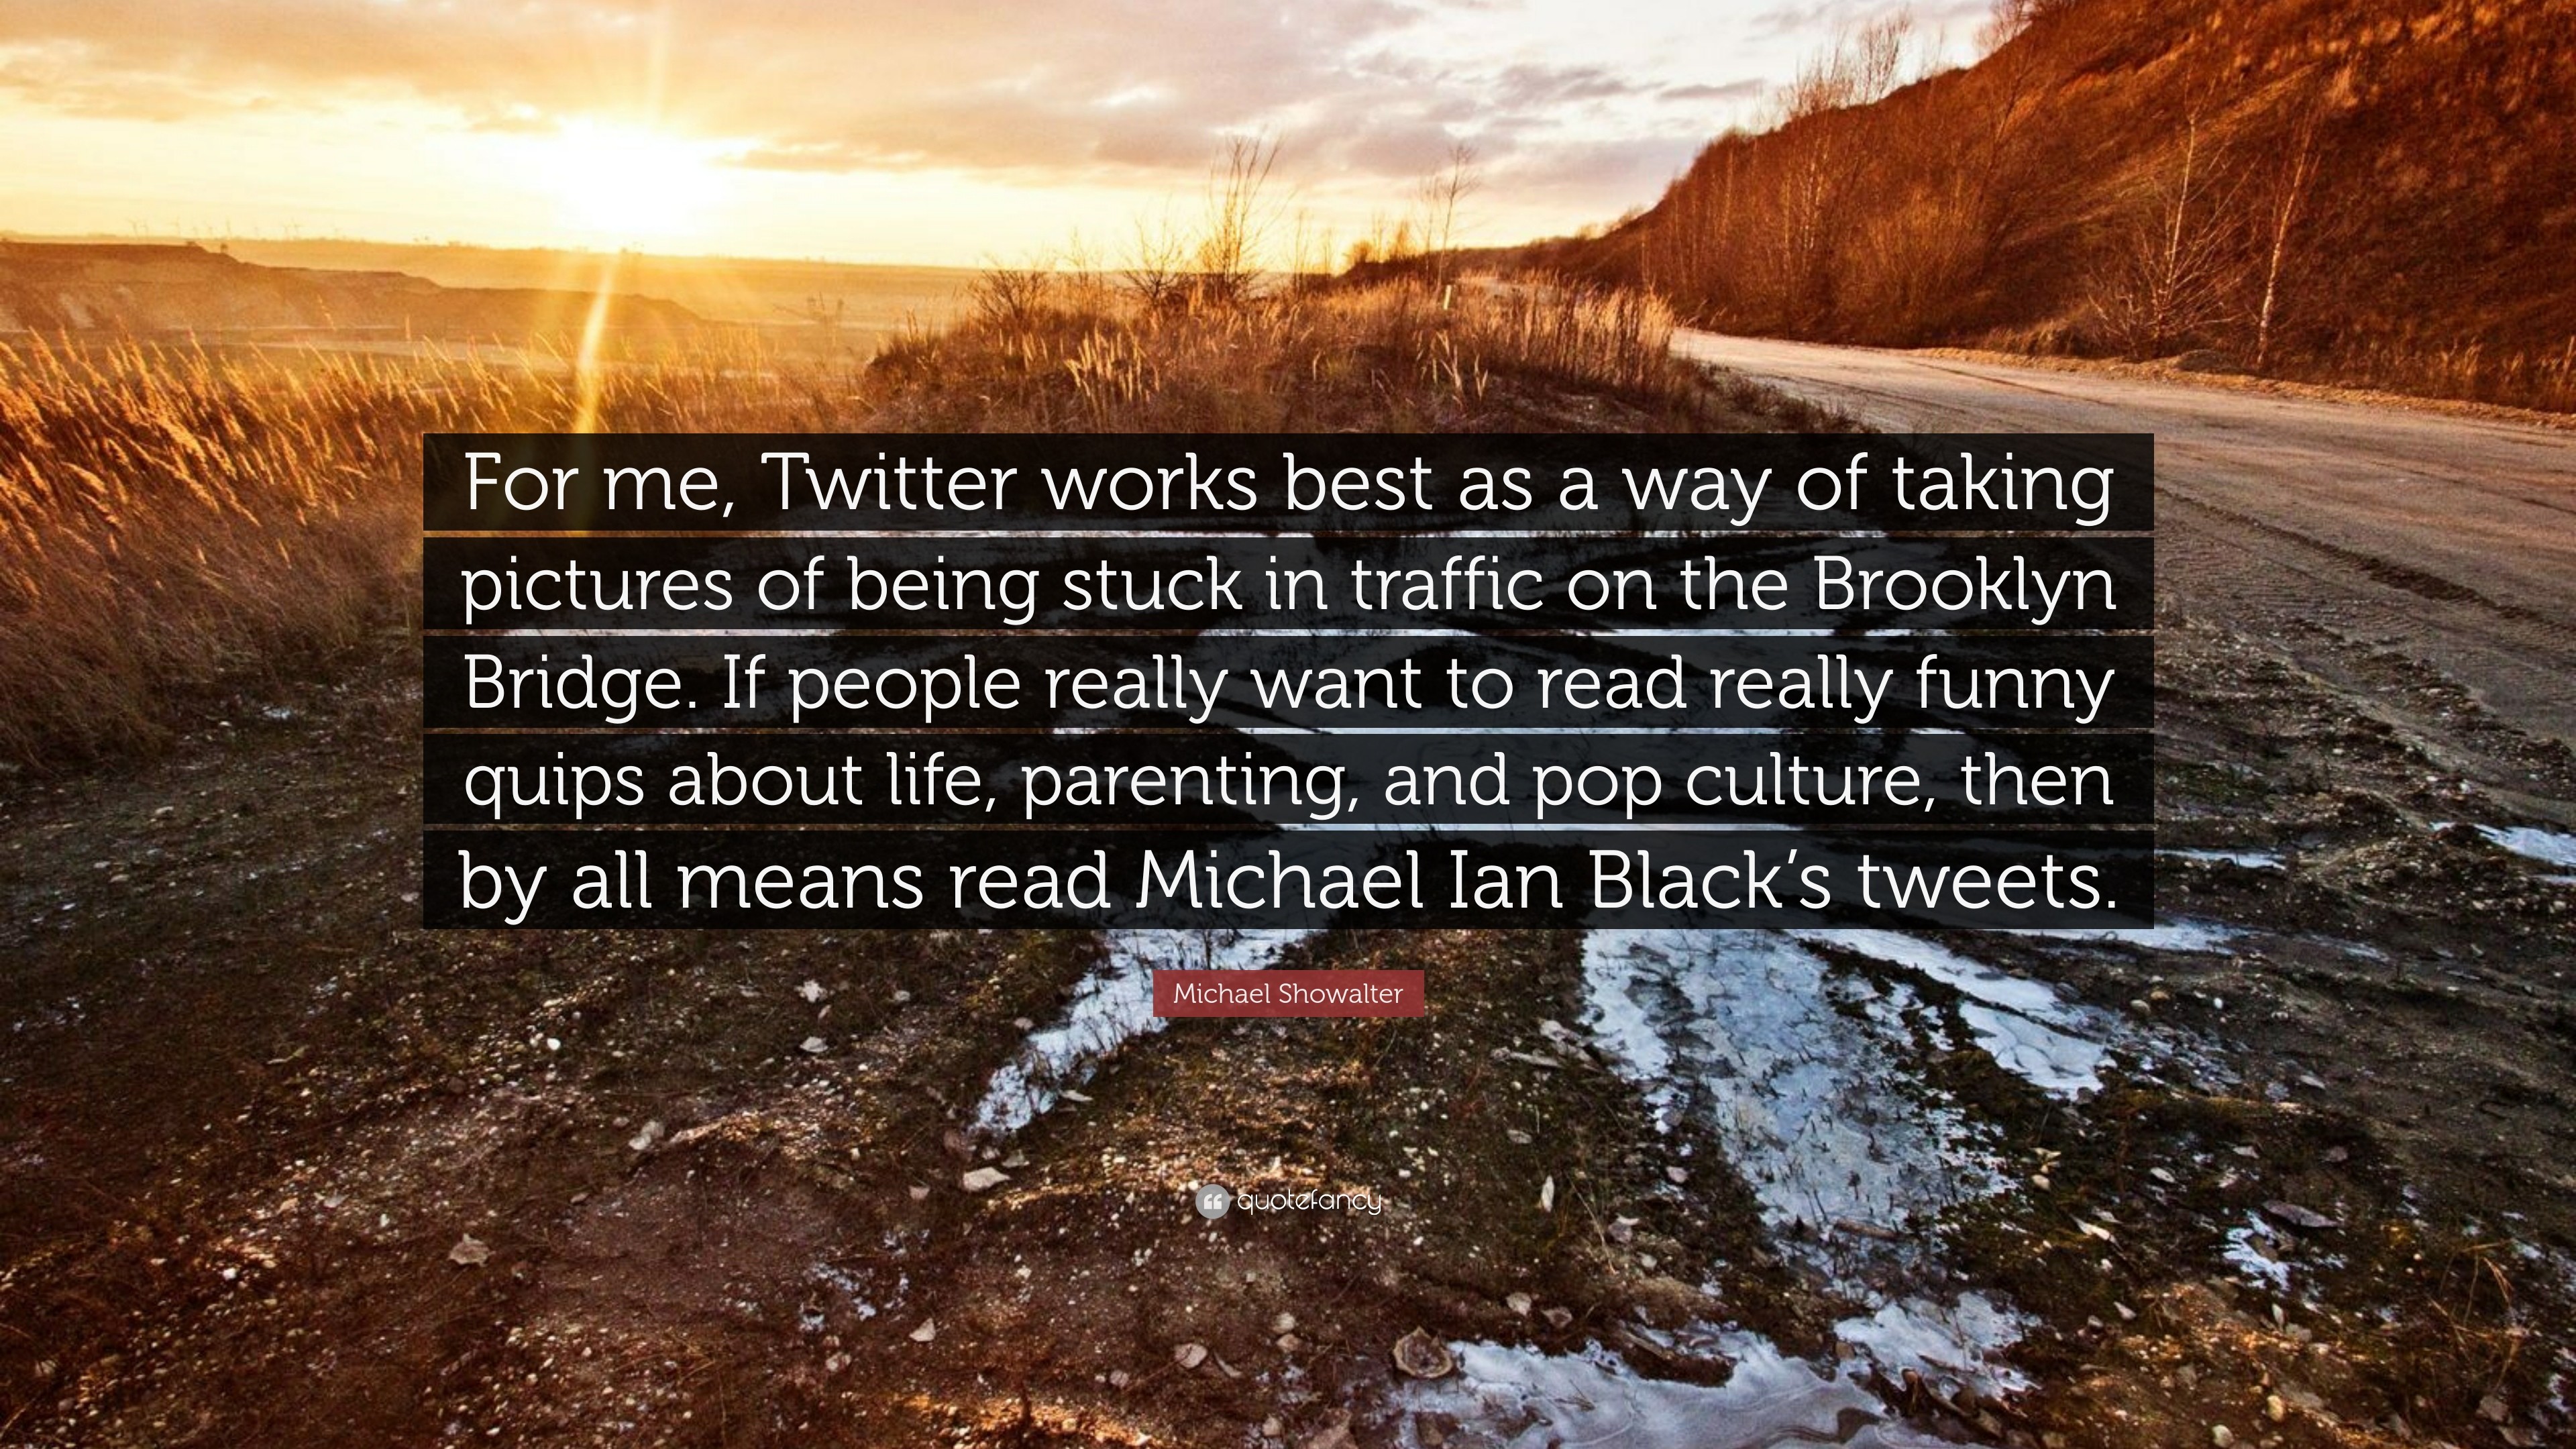 3840x2160 Michael Showalter Quote: “For me, Twitter works best as a way of taking